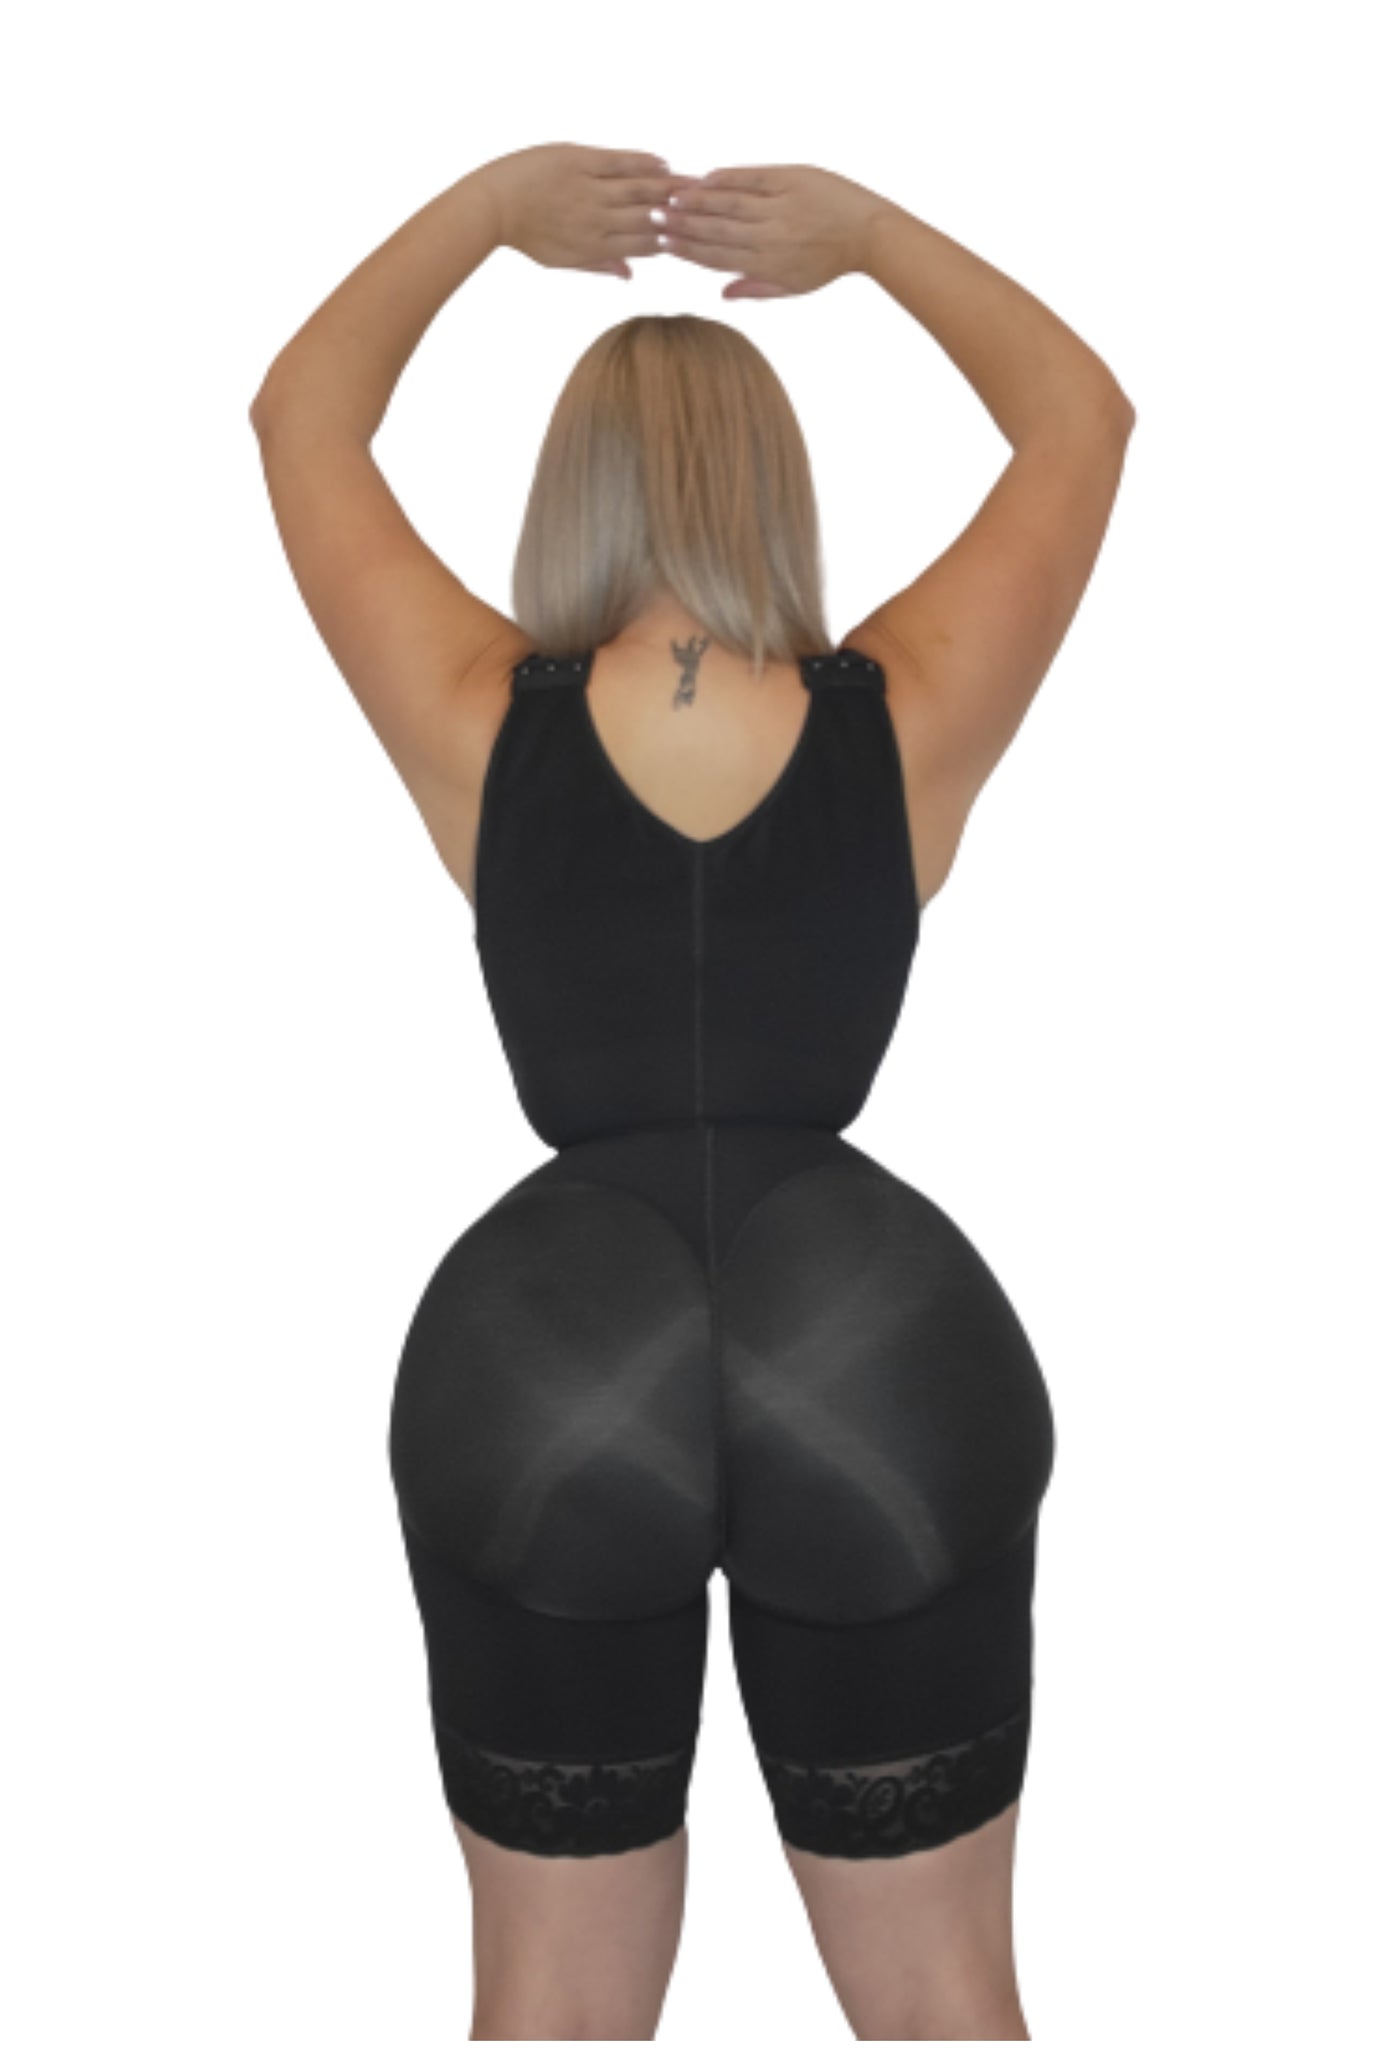 Curvas Beauty - If you need the waist taken in because you've lost inches  in that area take it to a tailor. You don't always need a smaller size faja  if your